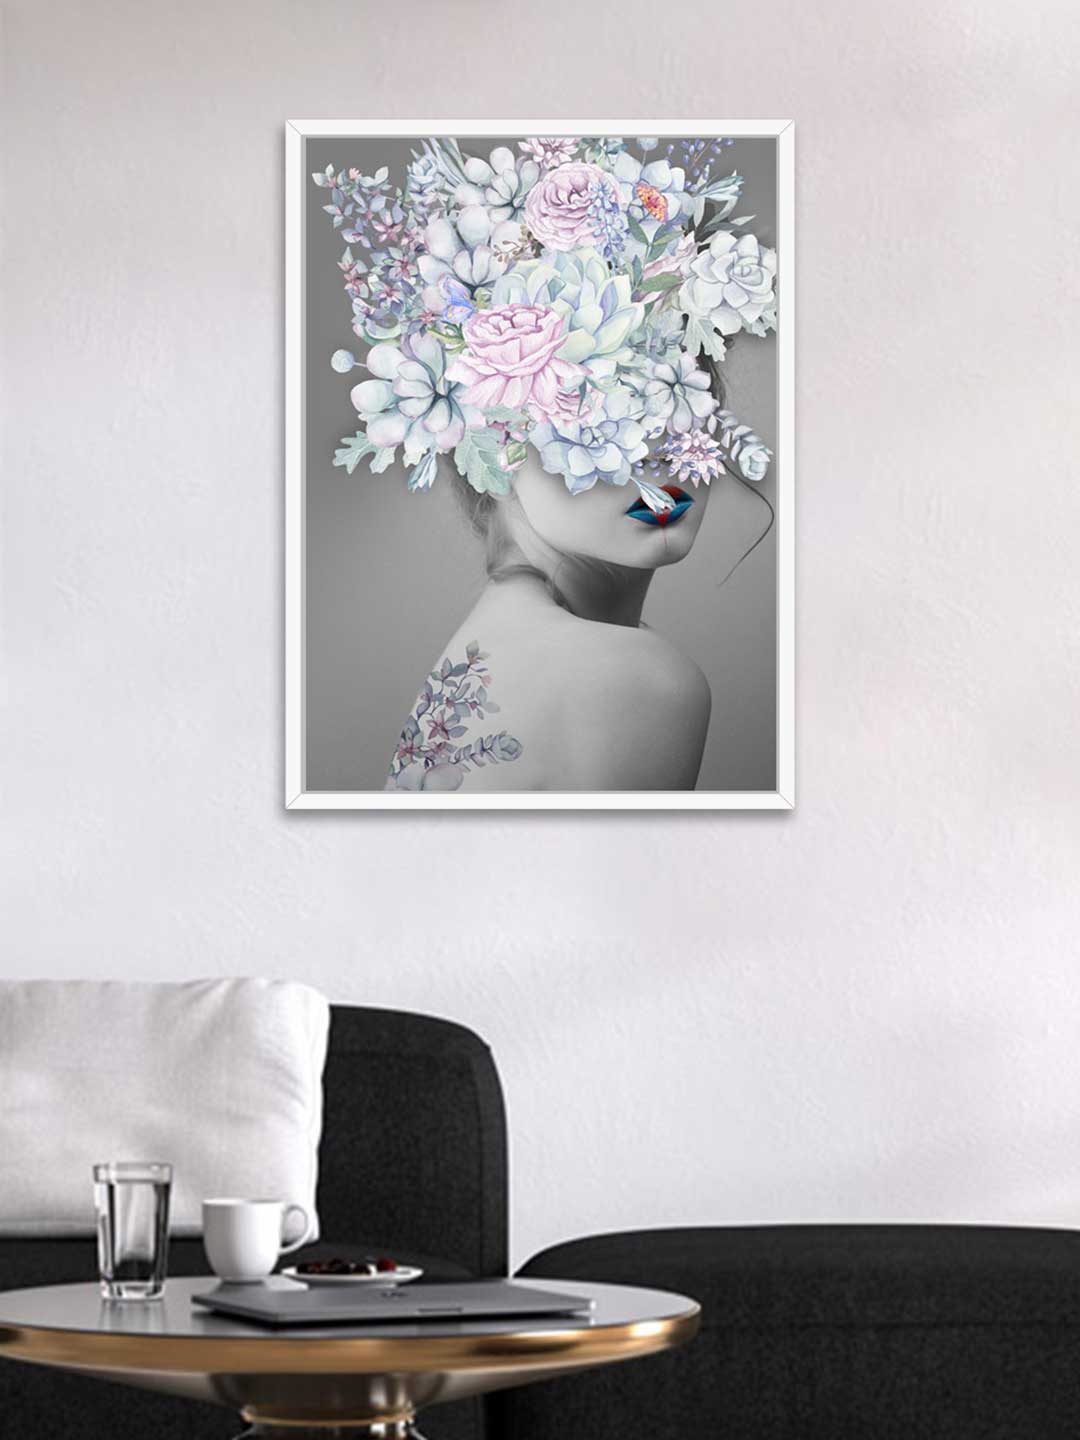 Art Street White   Black Floral Theme Wall Art Canvas Painting with Wooden Frame